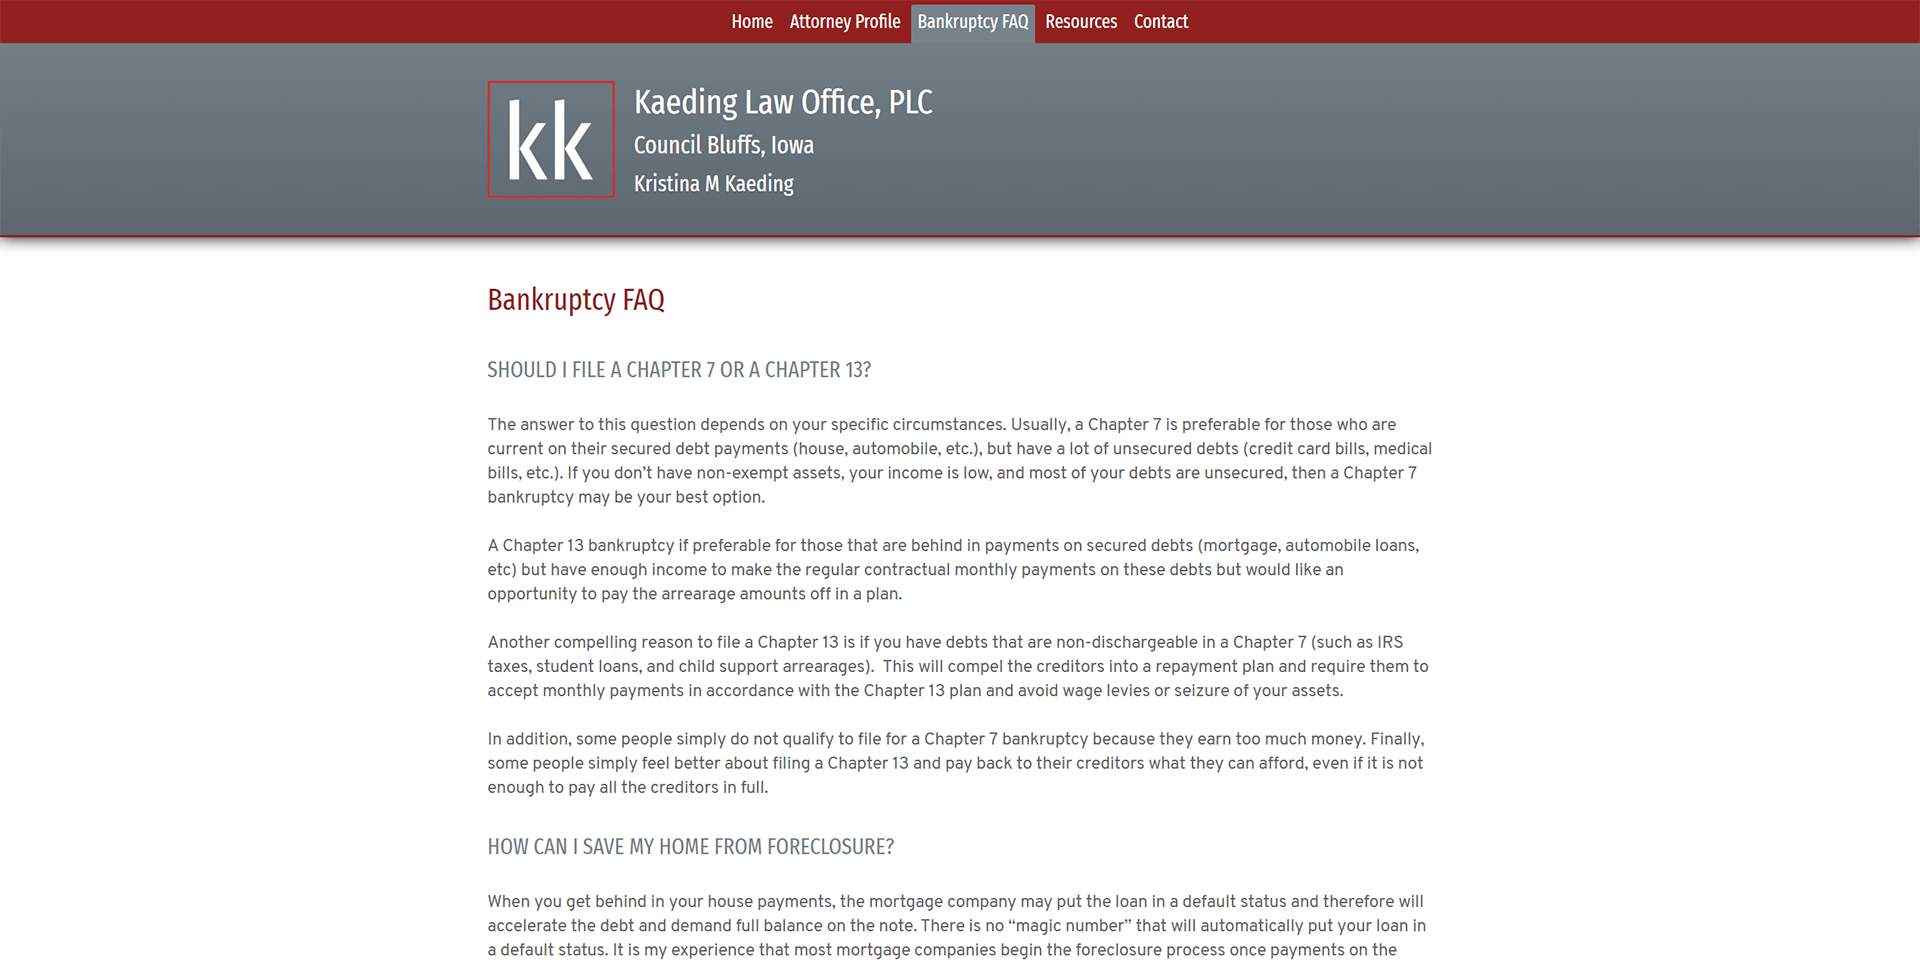 Kaeding Law Office Bankruptcy FAQ Page